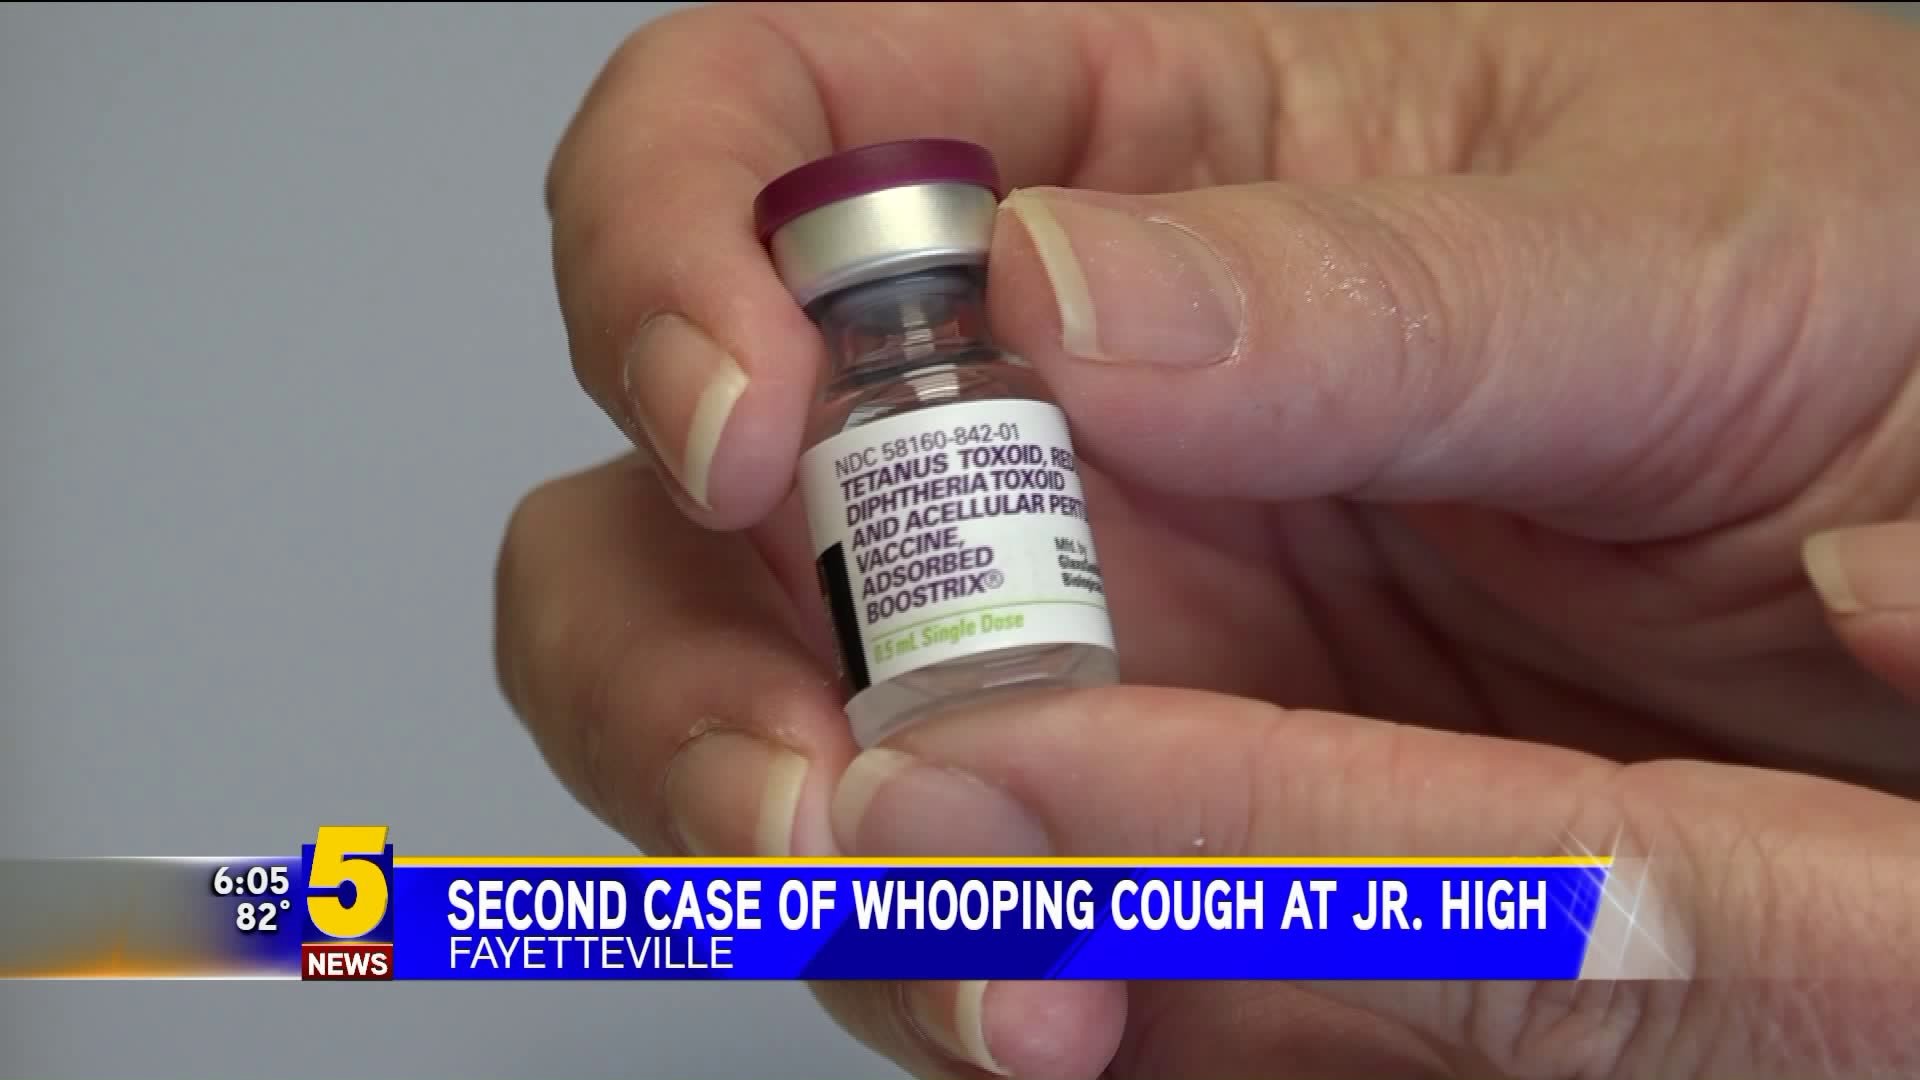 Second Case of Whooping Cough at Jr. High